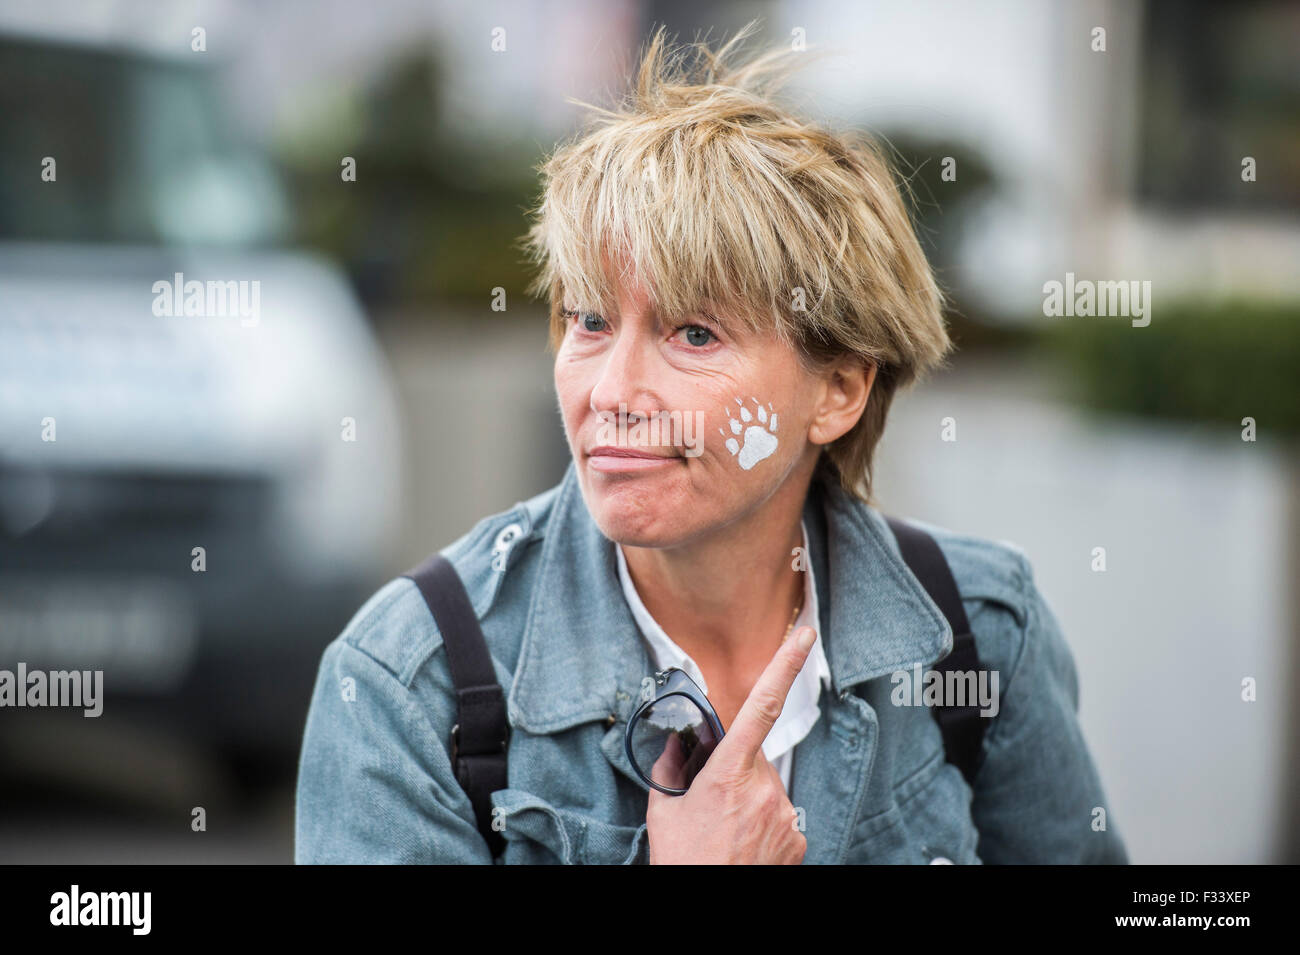 London, UK. 29th September, 2015. Emma Thompson (here having a paw print painted on her face), and Greenpeace UK Executive Director John Sauven, deliver a celebration speech to crowds outside Shell’s offices – in response to yesterday’s announcement by , the Anglo-Dutch oil major, Shell that it was pulling out of Arctic oil drilling. After speaking, Emma helped volunteer puppeteers move Aurora the double decker bus sized polar bear from in front of Shell’s front door. Credit:  Guy Bell/Alamy Live News Stock Photo